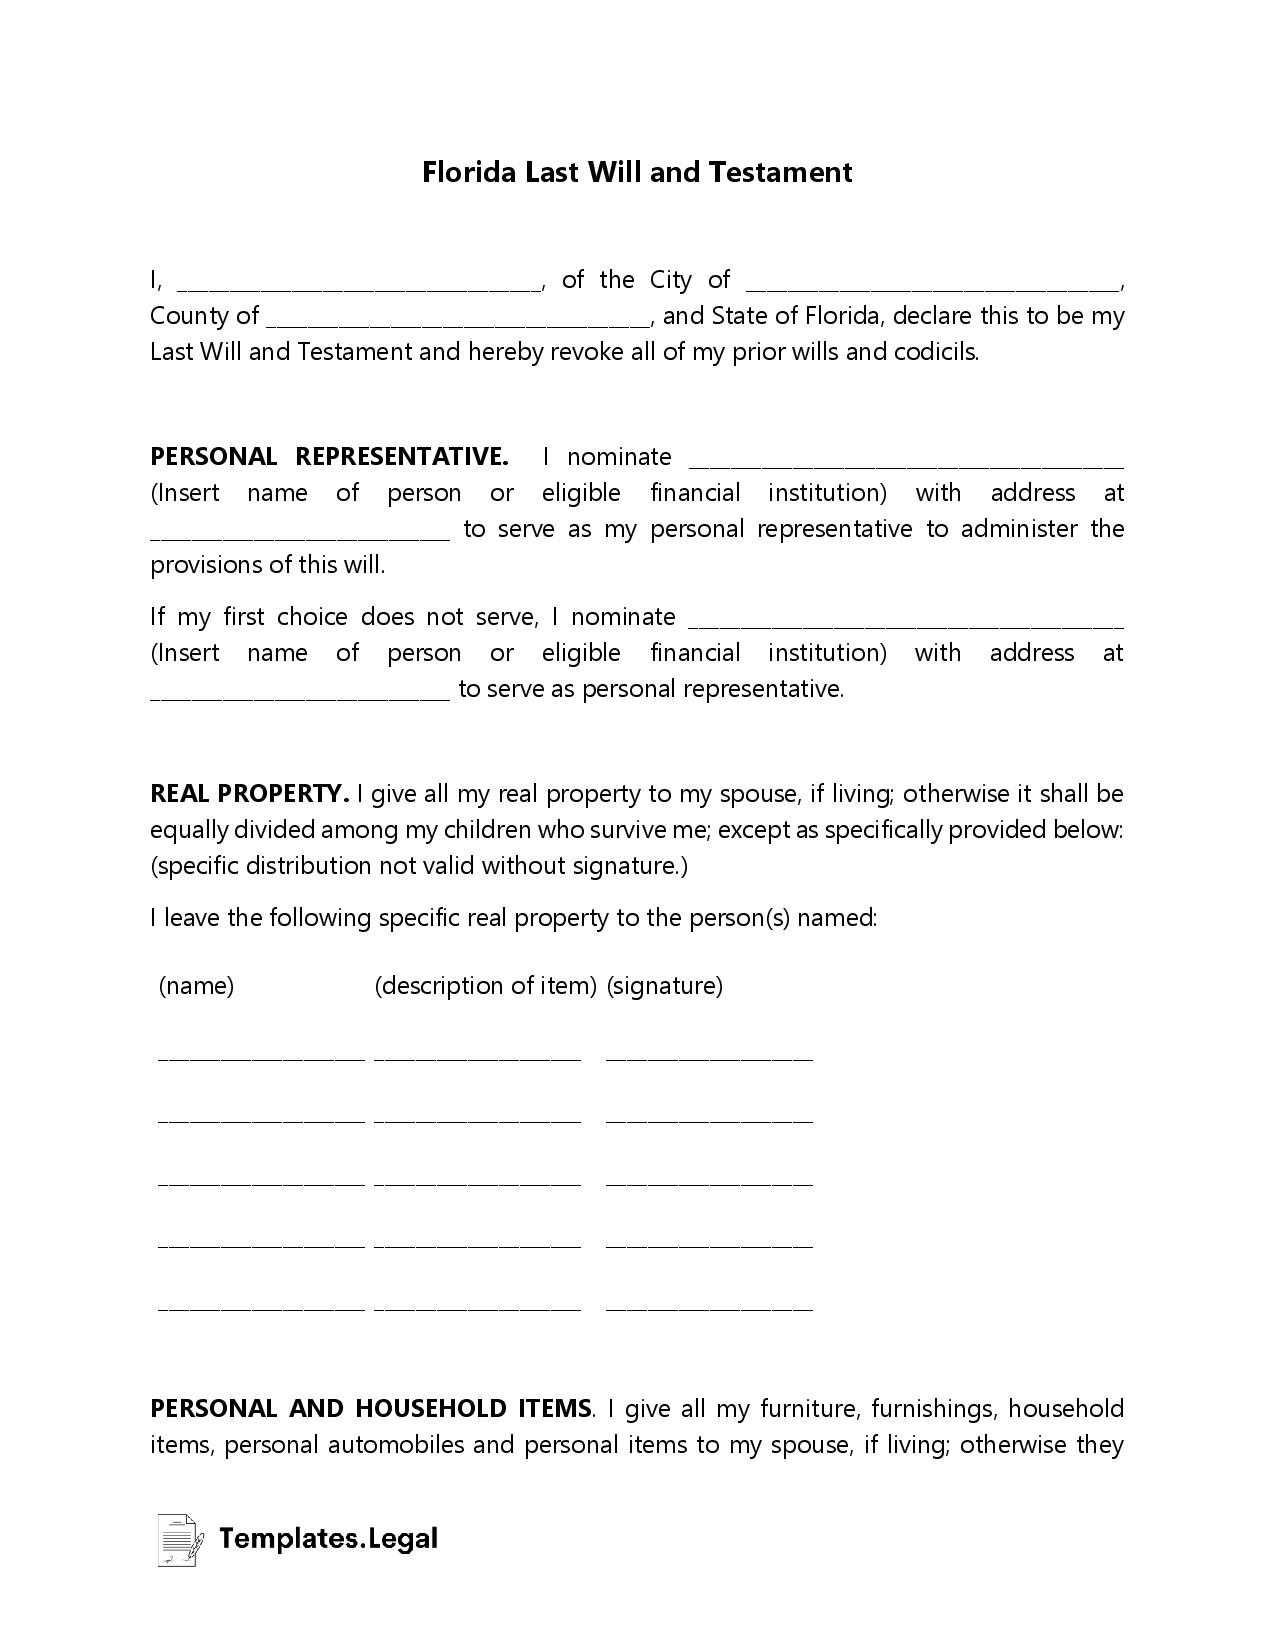 Florida Last Will and Testament - Templates.Legal